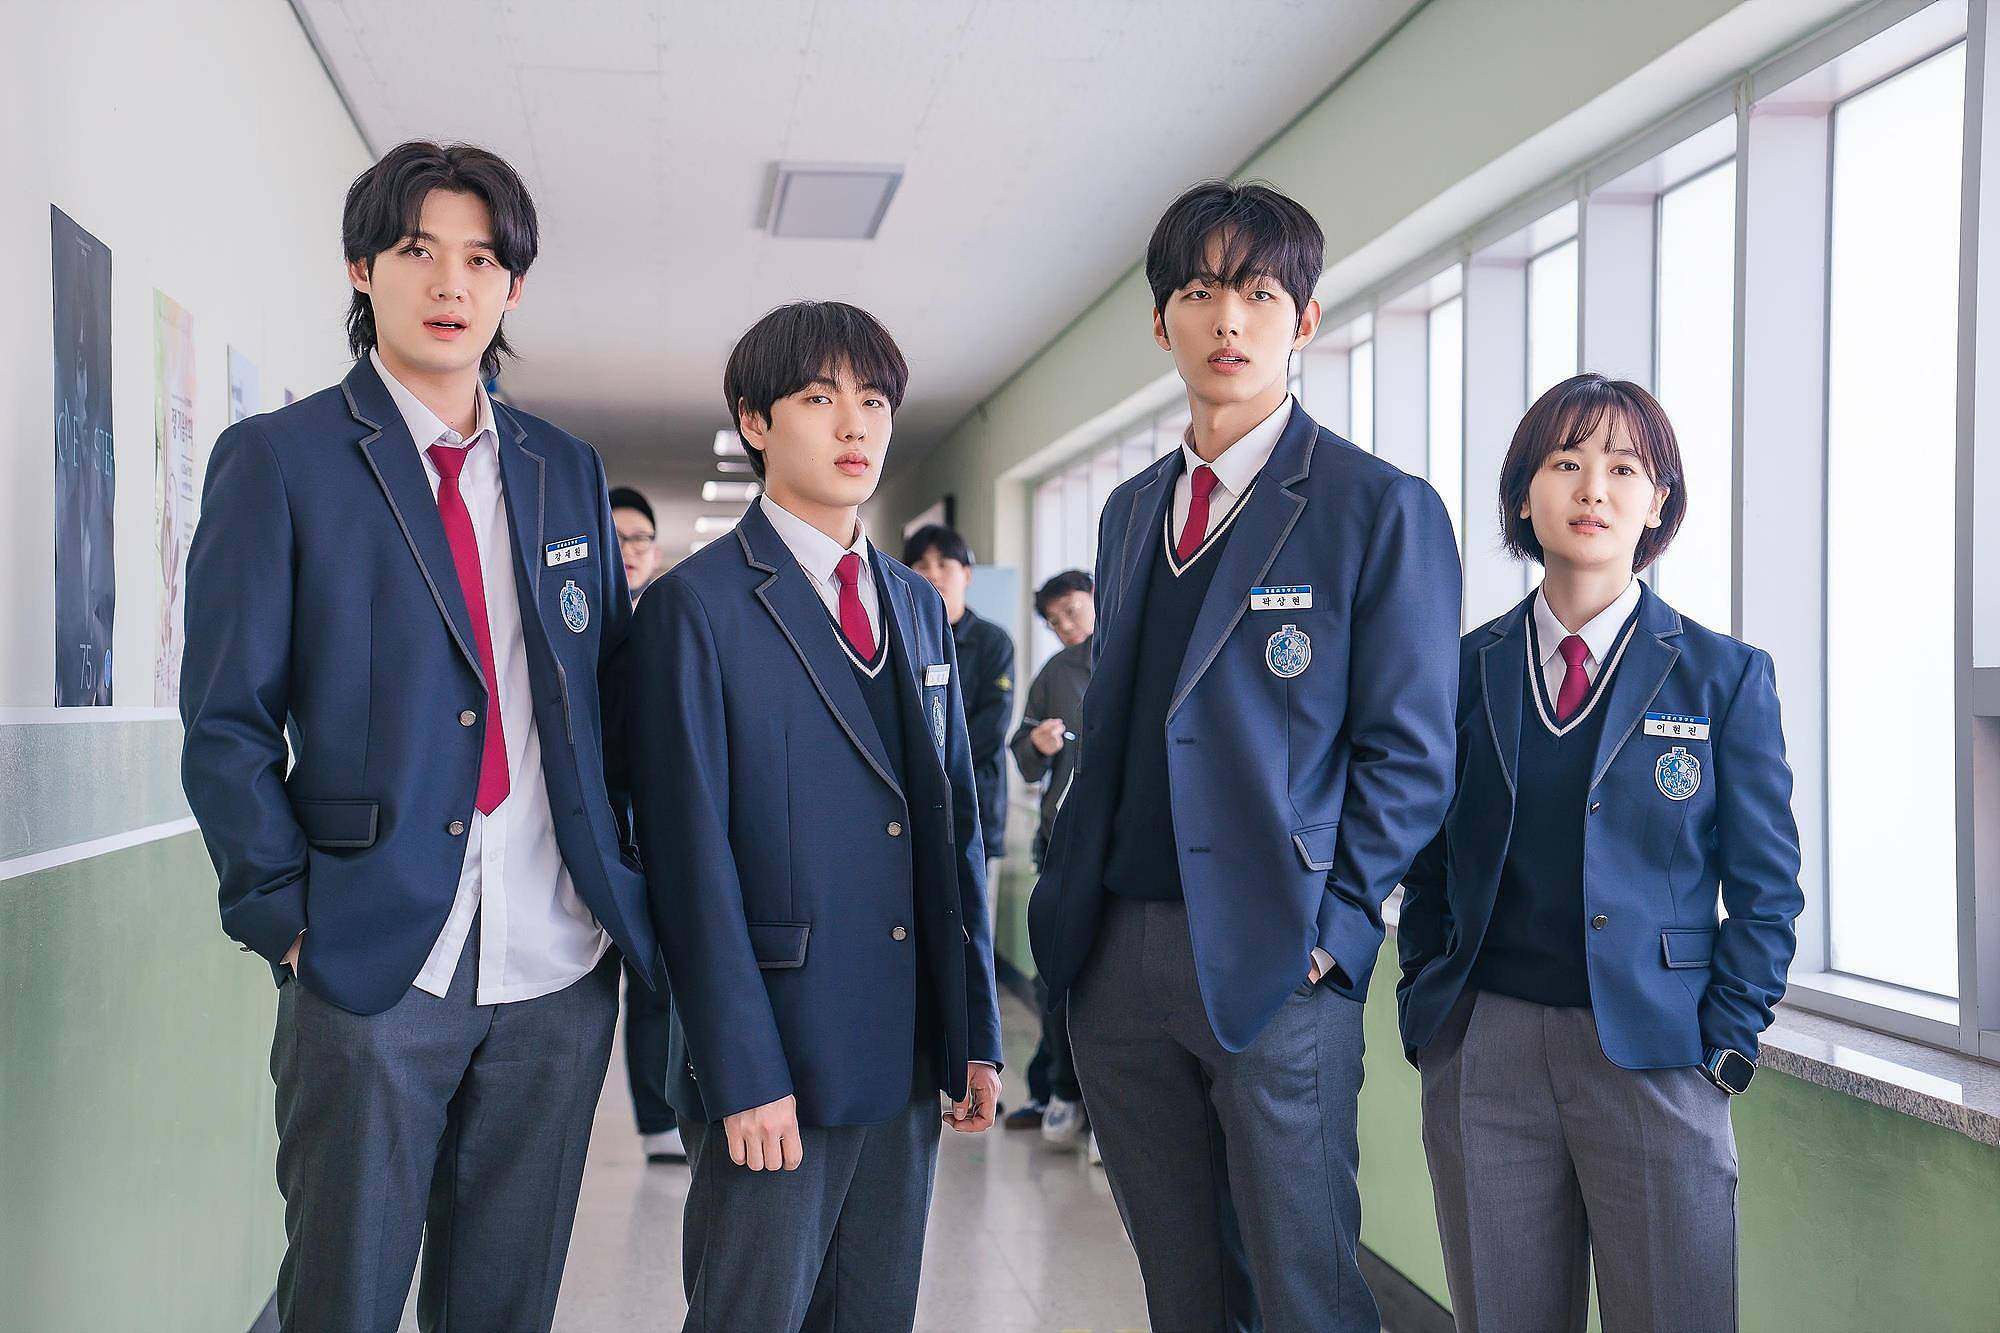 Yoon Hyun-soo (second from left) and Lee Jung-sic (second from right) as Se-hoon and Sang-hyeon in a still from “I Am a Running Mate”, a bright, peppy comedy set in a Korean high school.